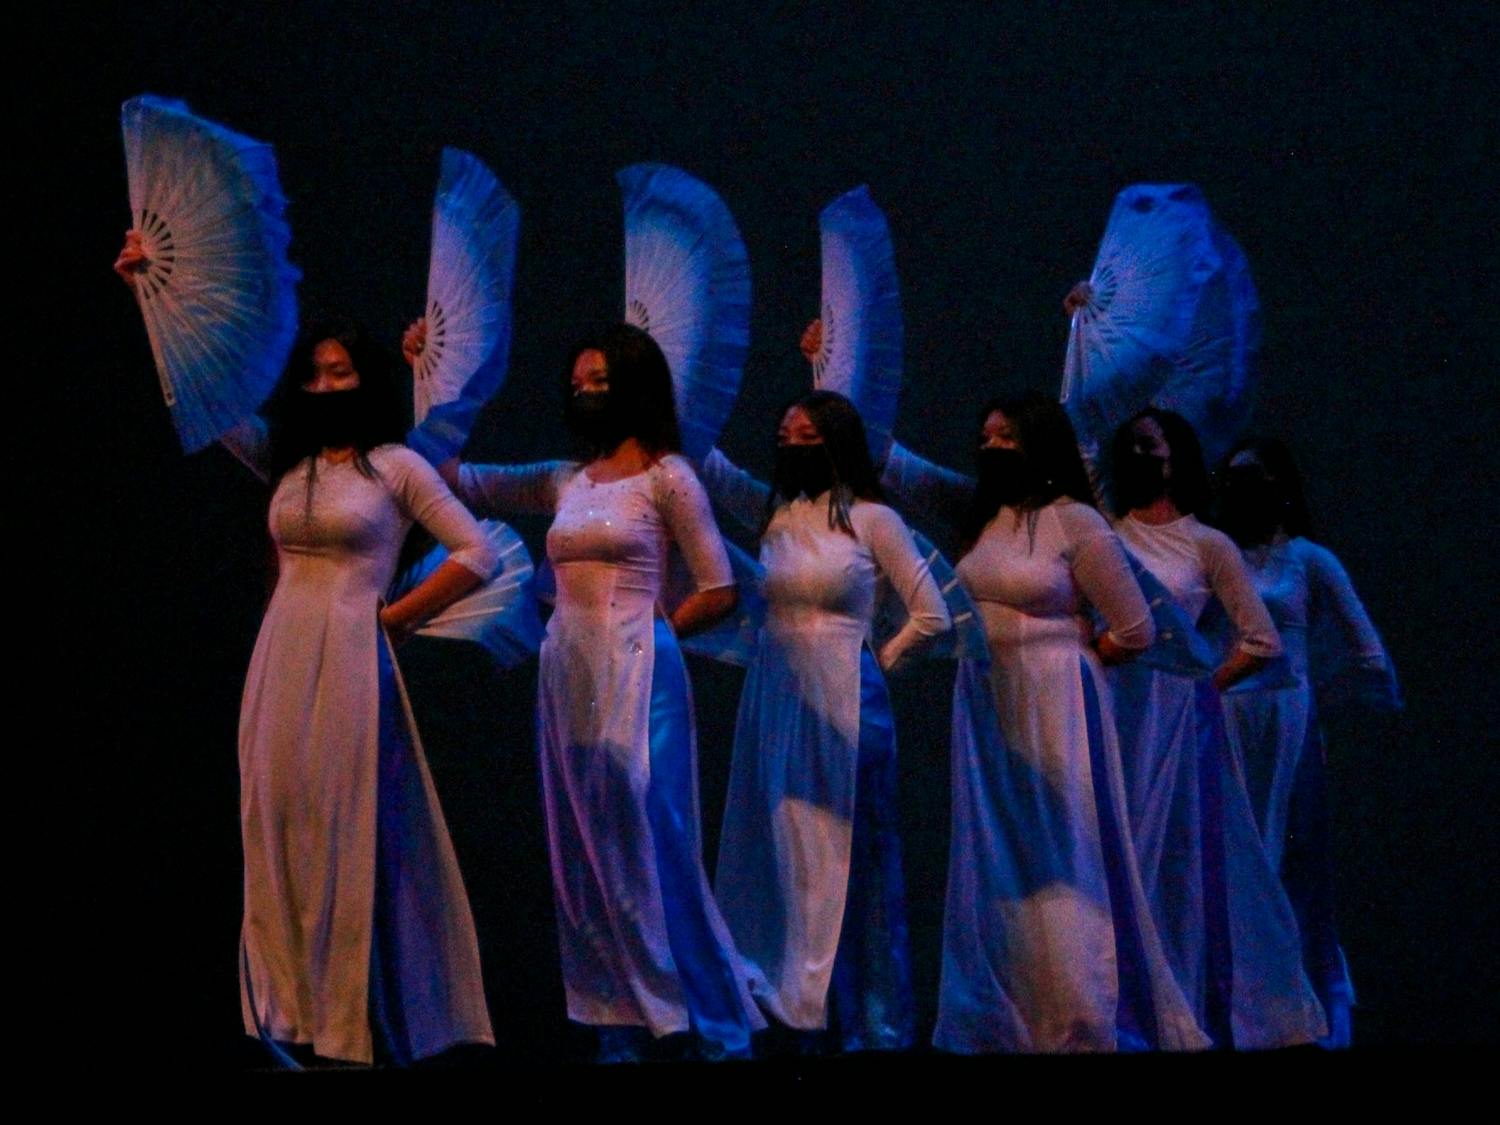 Blue Star performed at UNC AASA's "Journey in Asia" event on Feb. 27, 2022 at Memorial Hall.